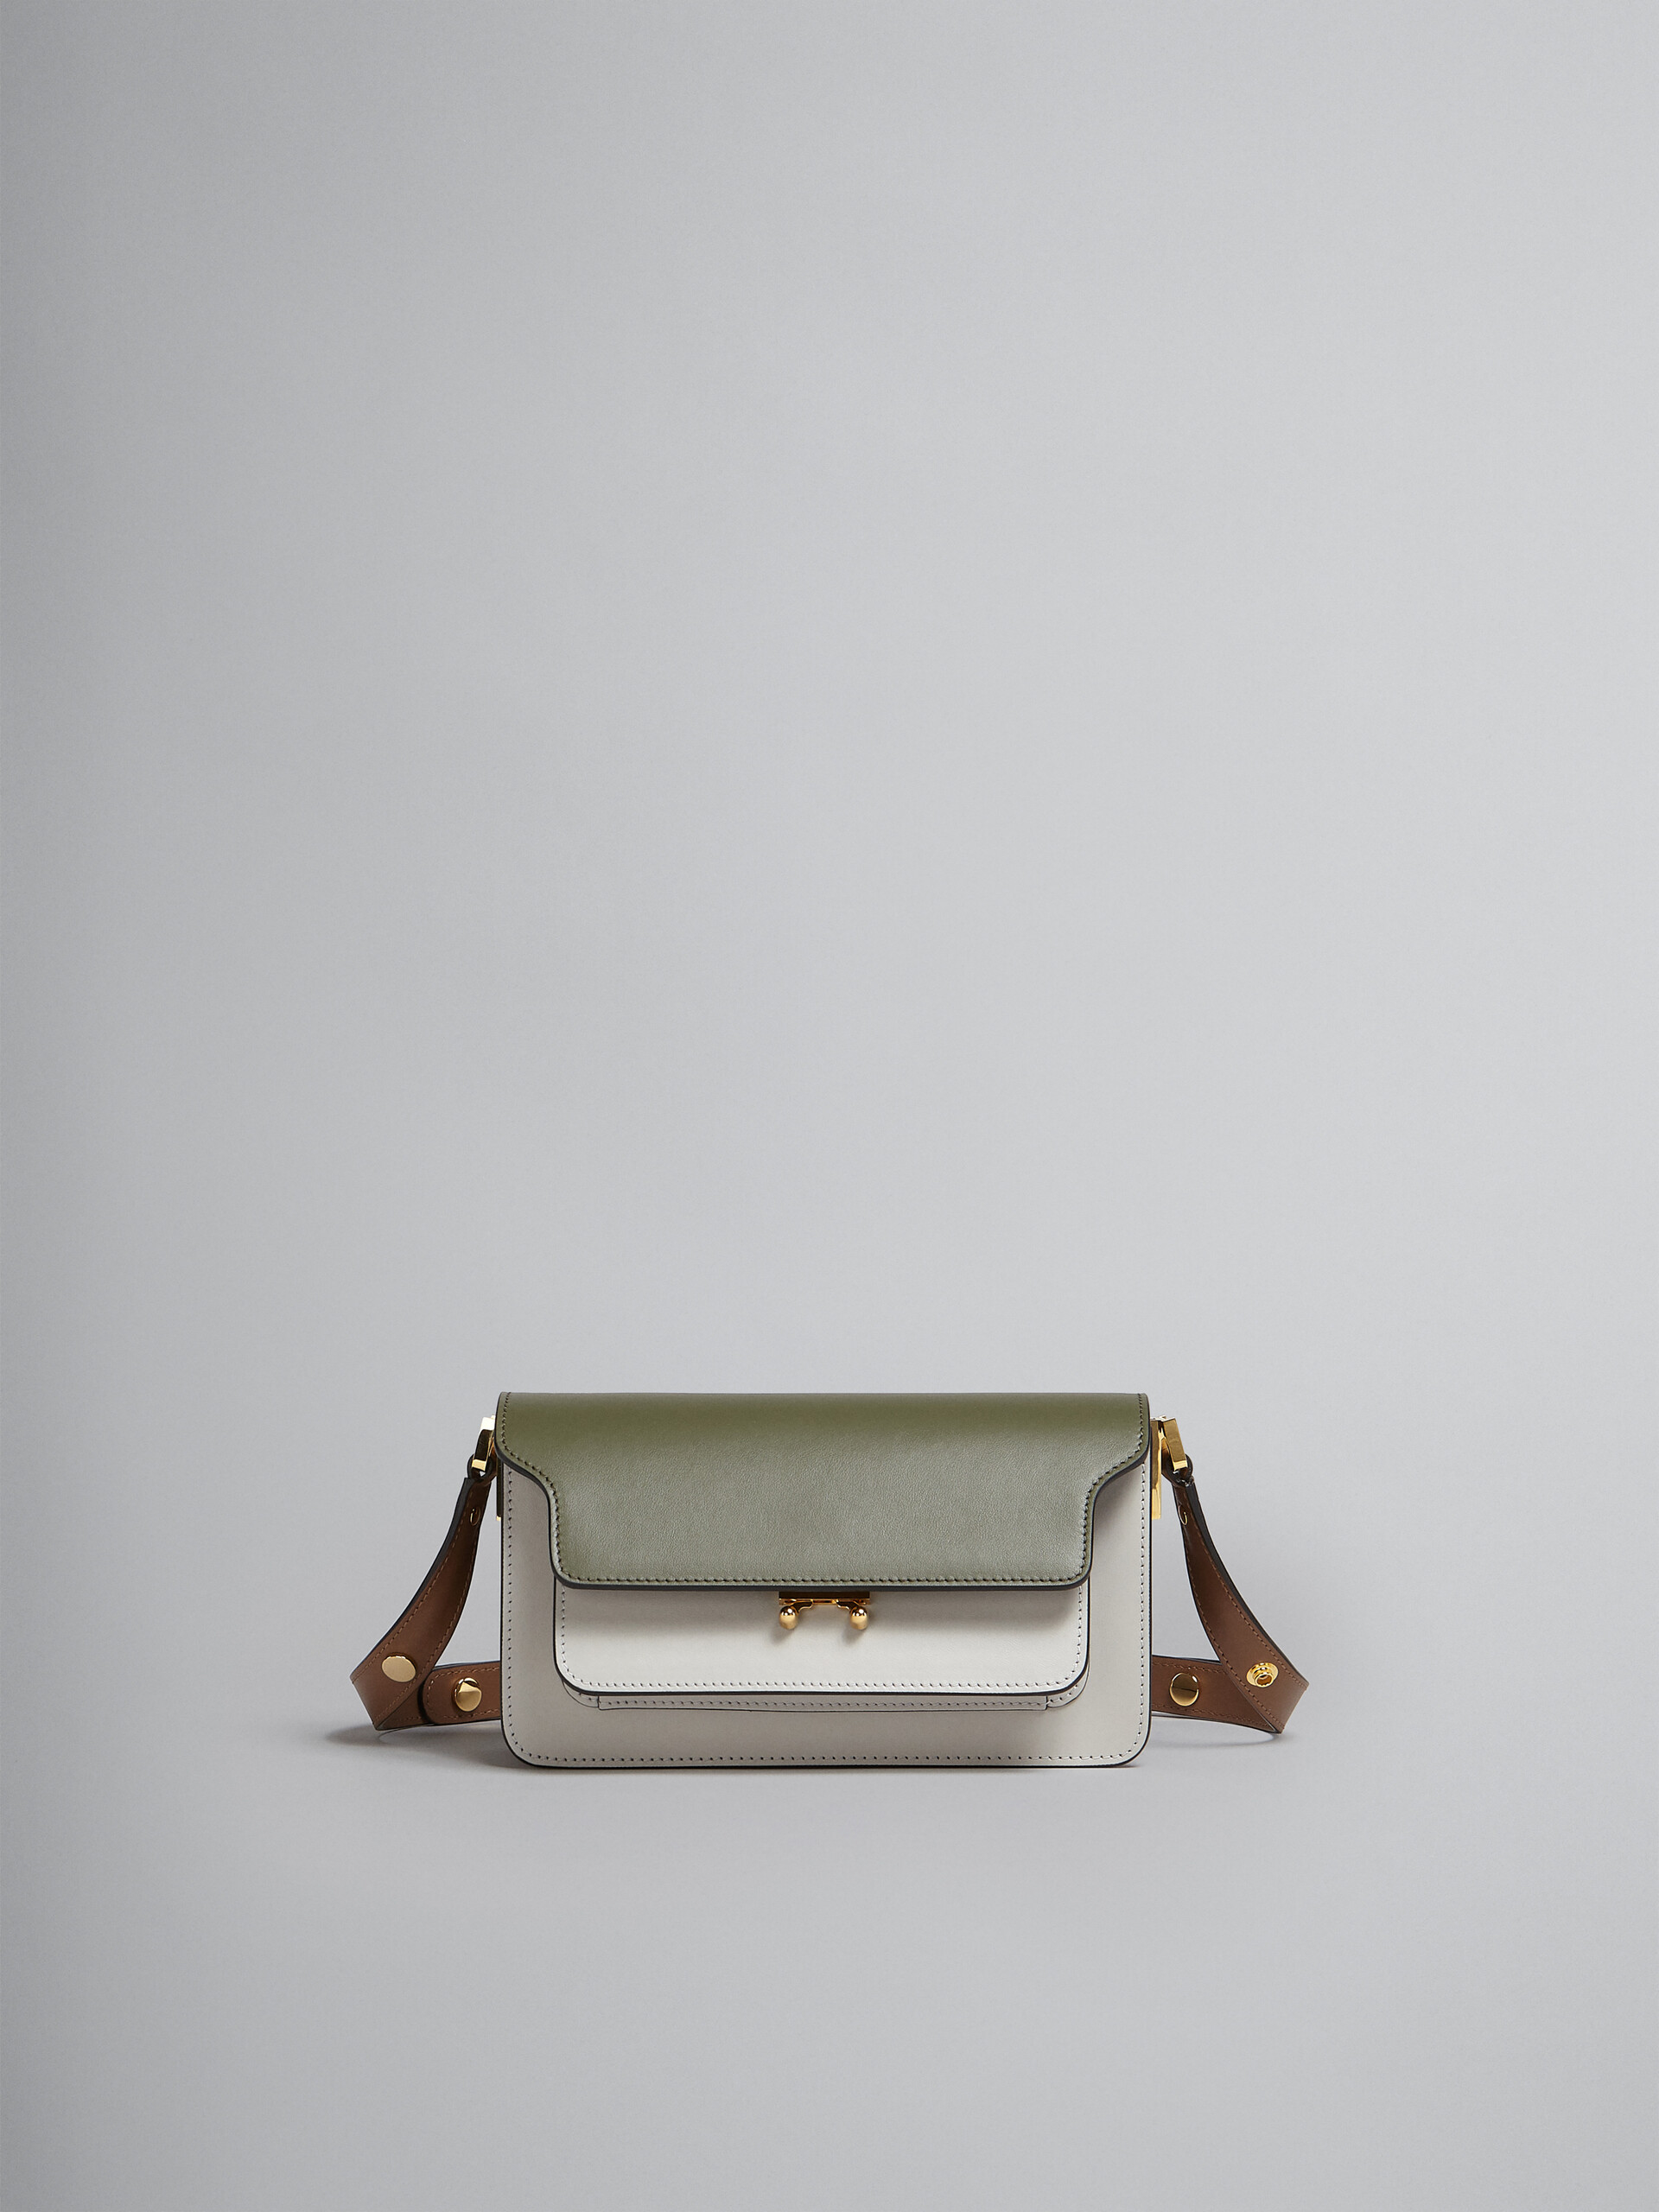 Trunk Bag E/W in green grey and brown leather - Shoulder Bags - Image 1